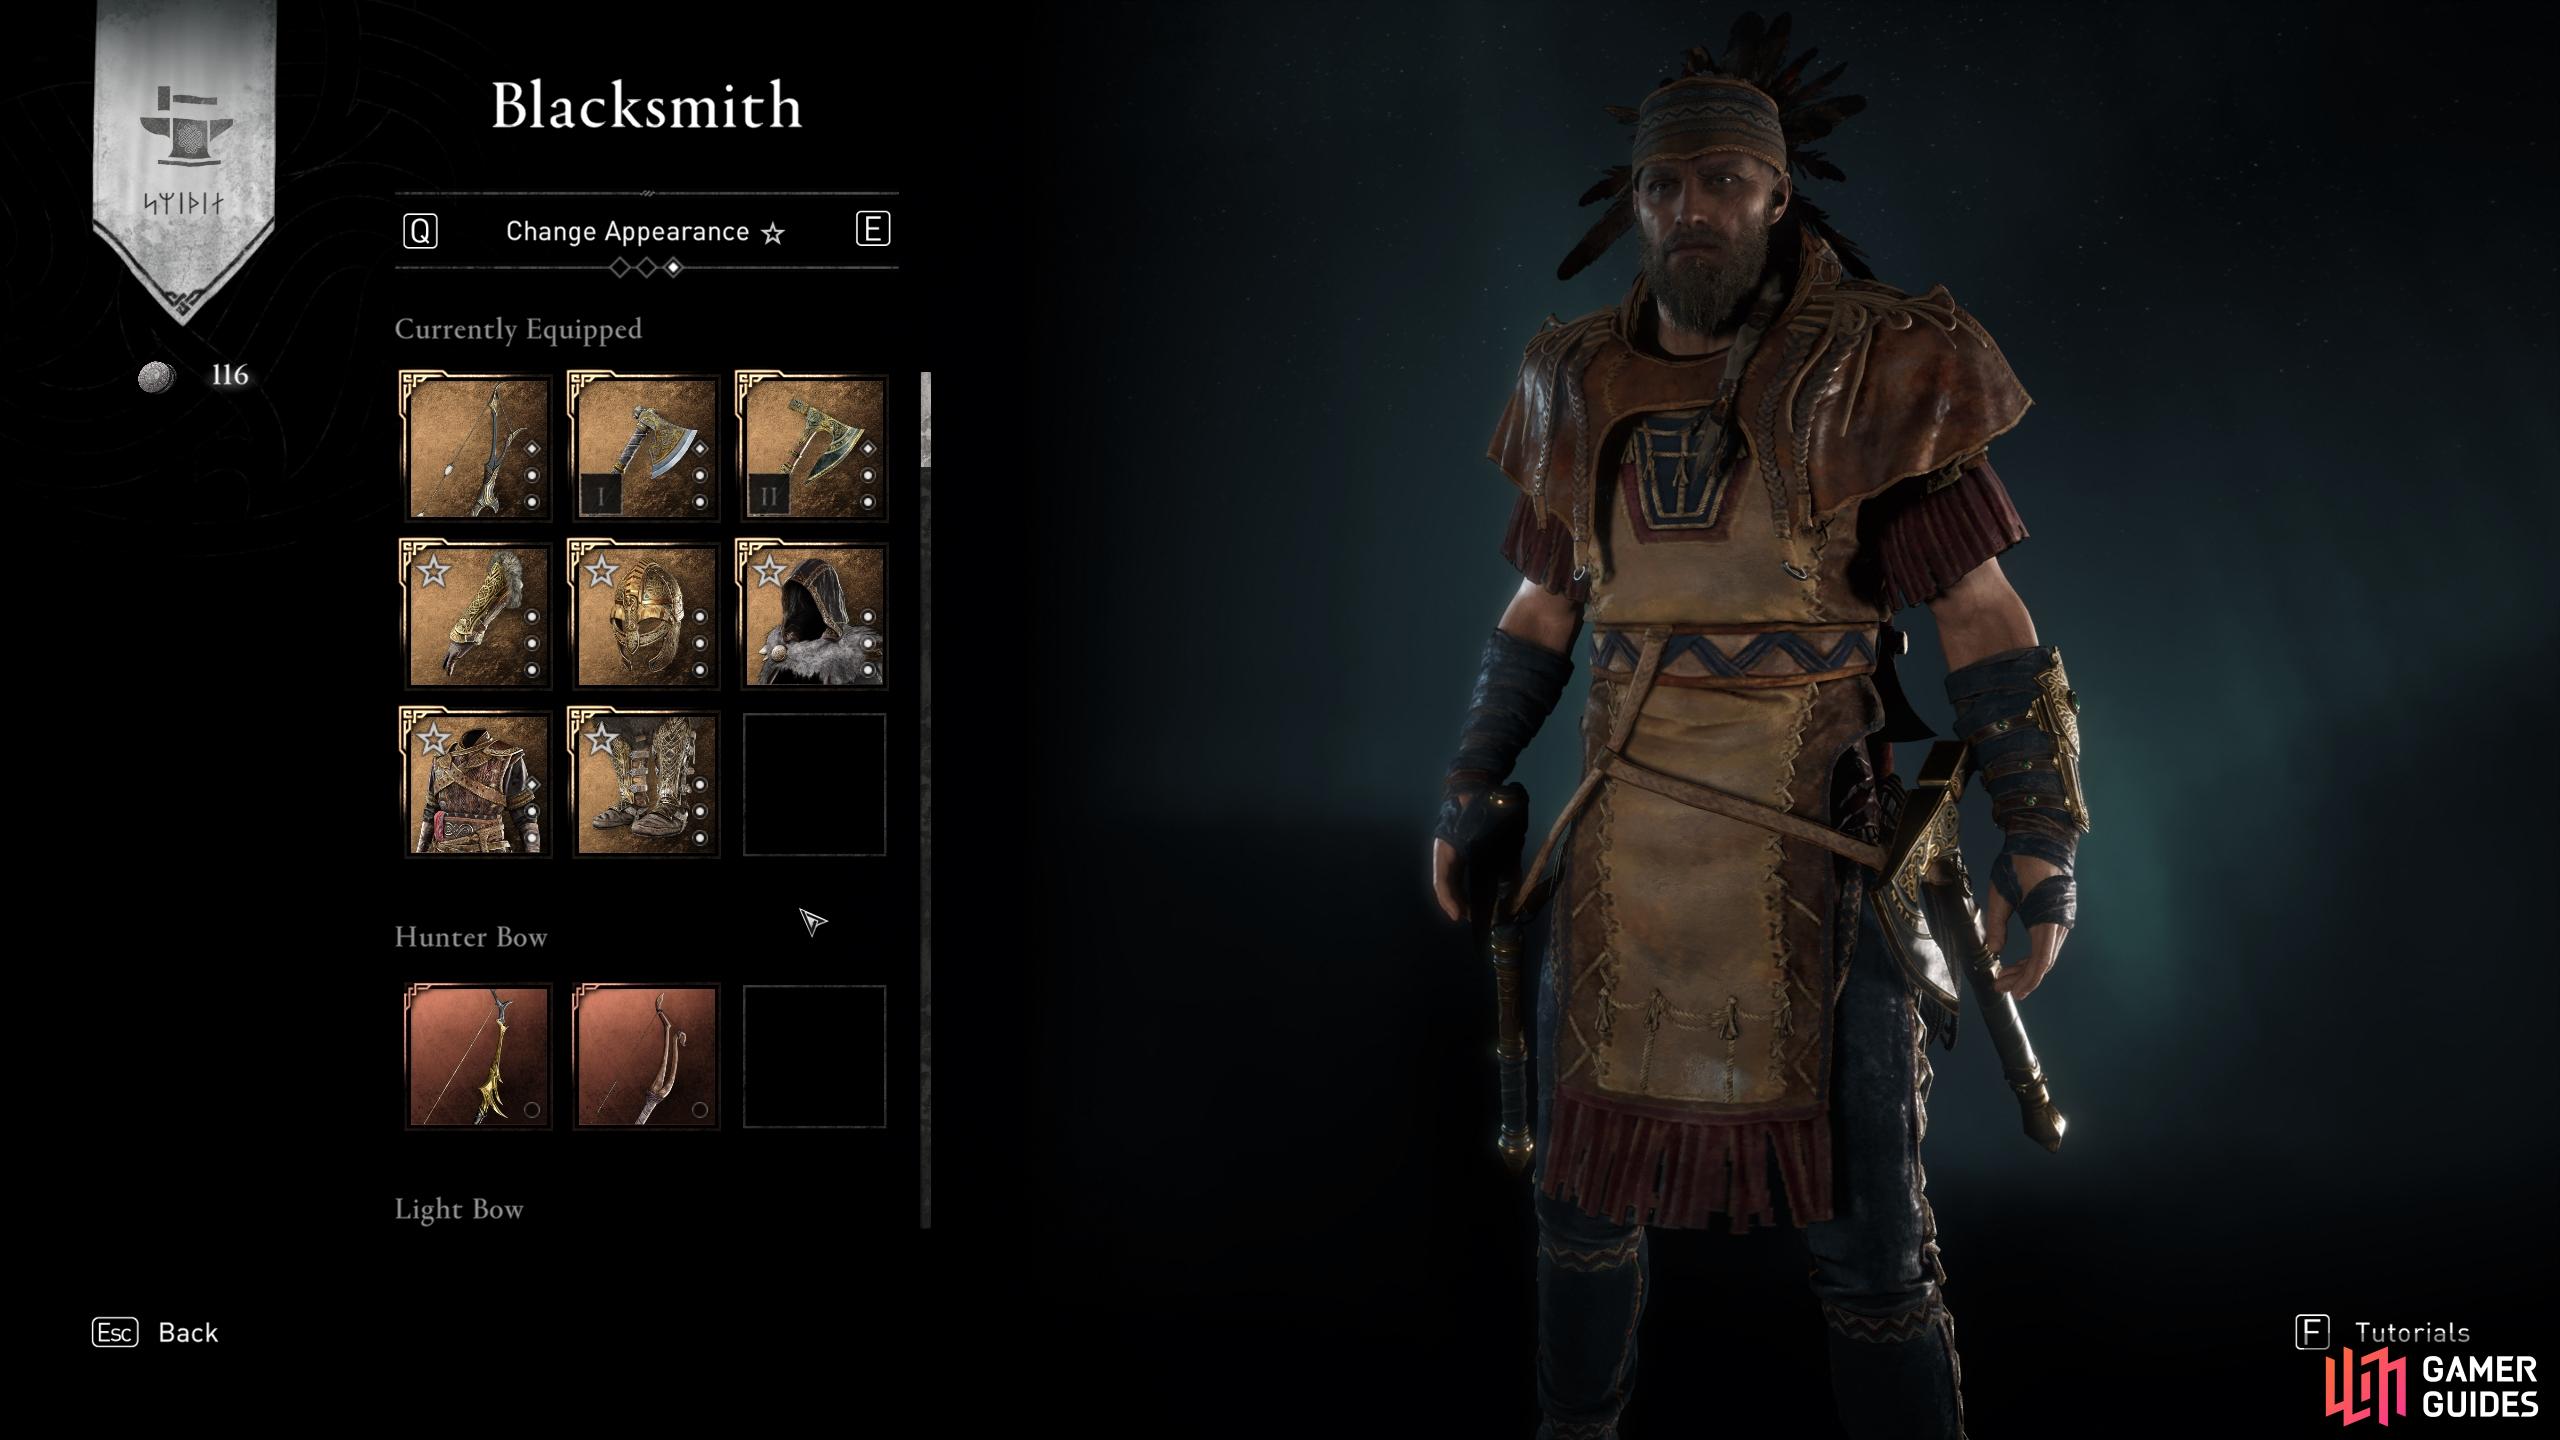 You can equip the entire Vinland set for its appearance, while keeping the stats of your regular armor.